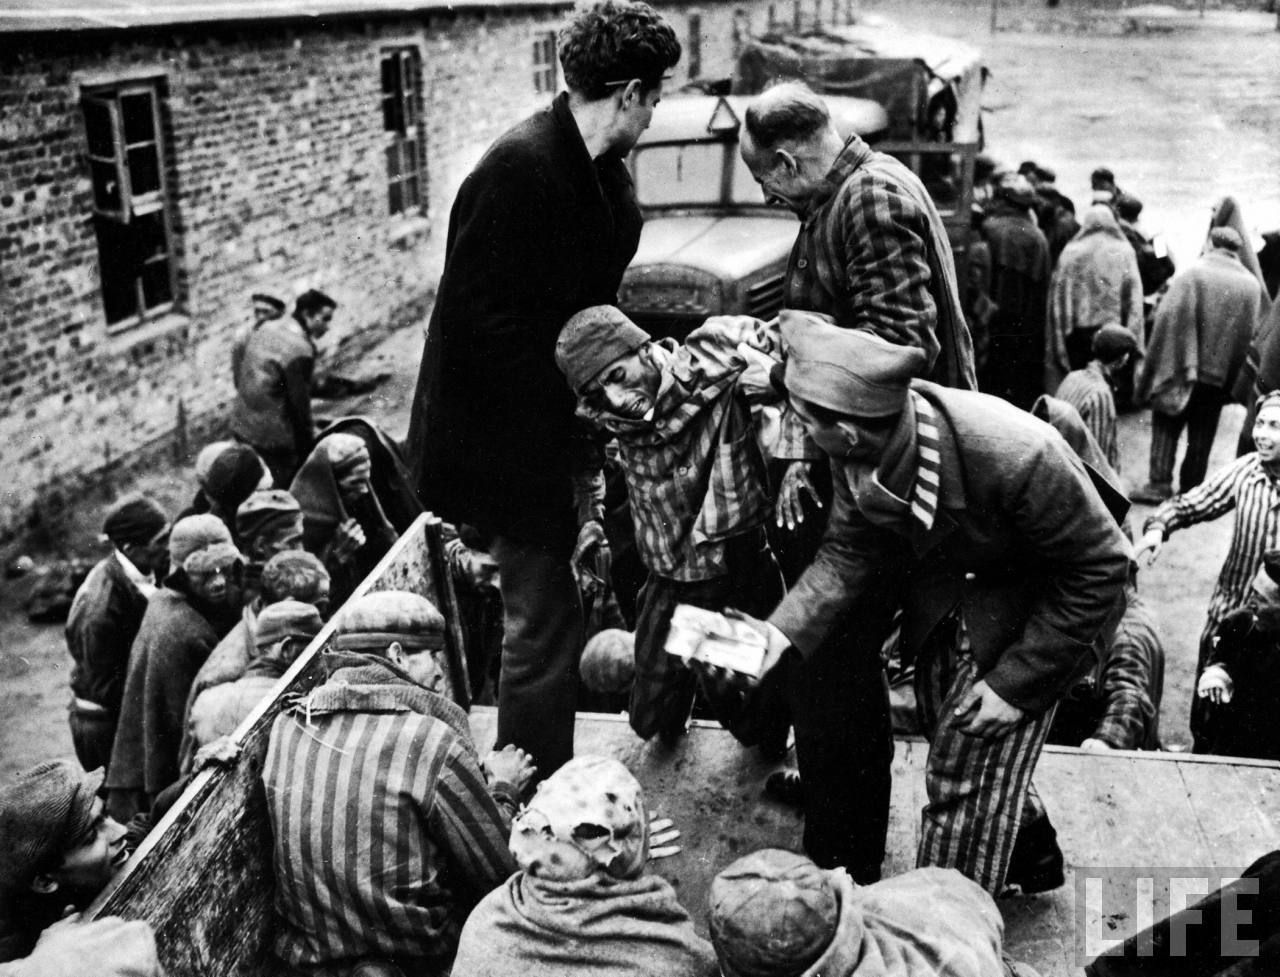 American soldiers liberating prisoners from a concentration camp at the end of W